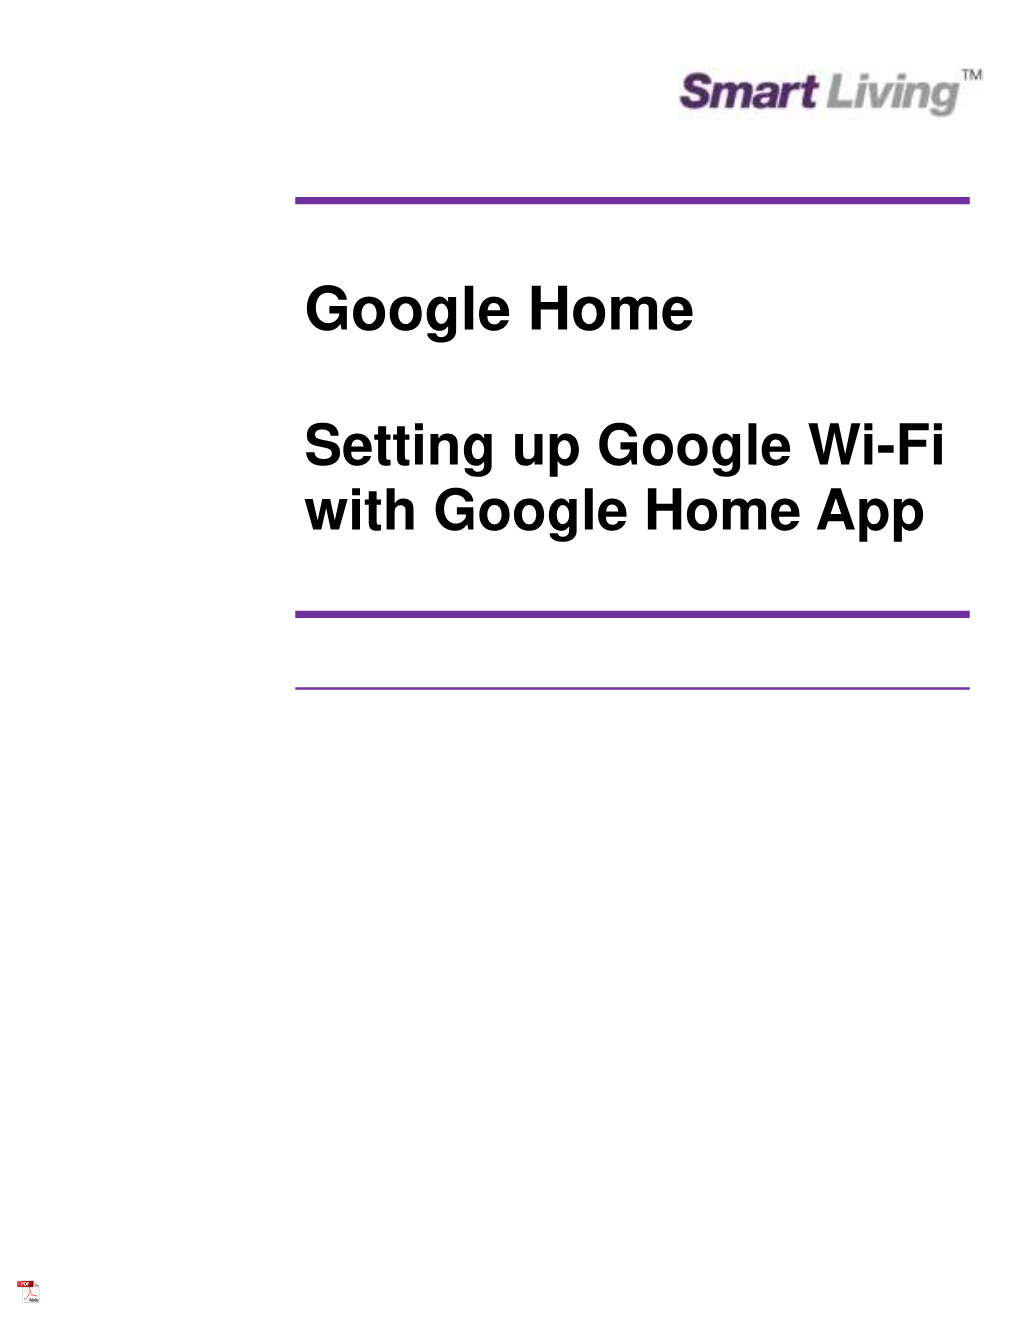 Setting up Google Wi-Fi with Google Home App